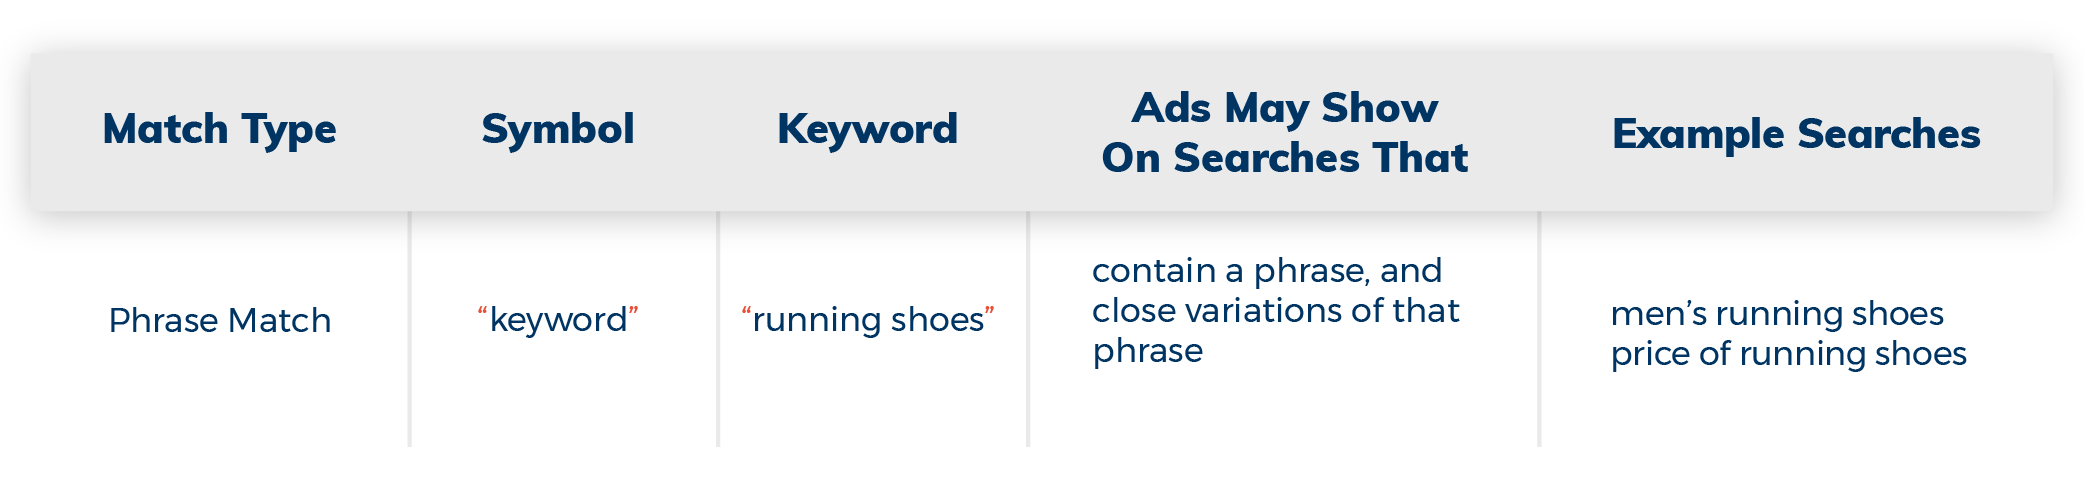 Phrase Match symbol and example searches